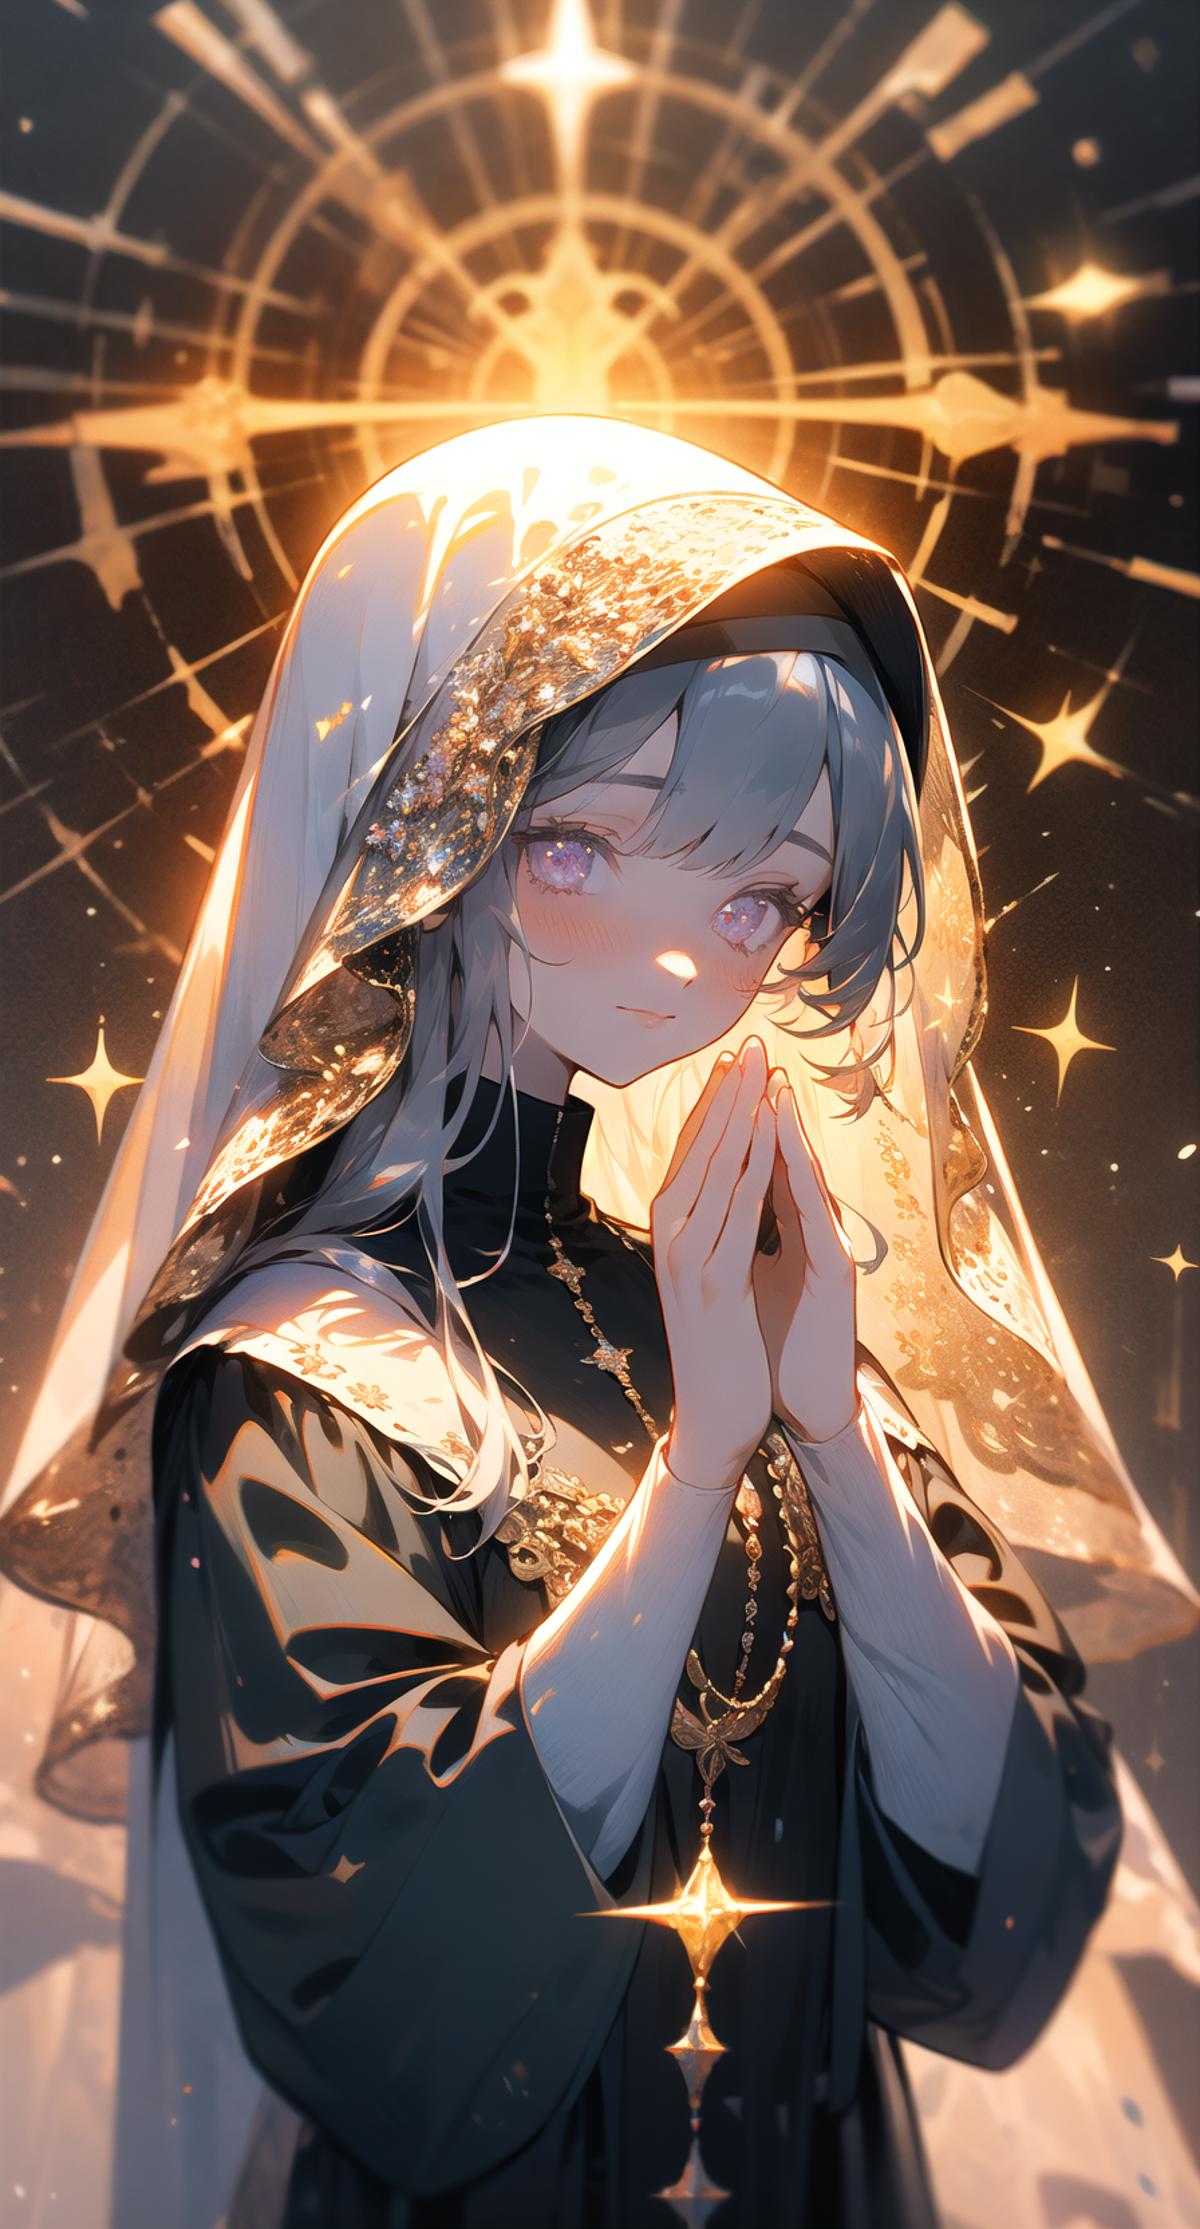 A beautifully drawn image of a woman in a nun's outfit praying with a veil on her head.